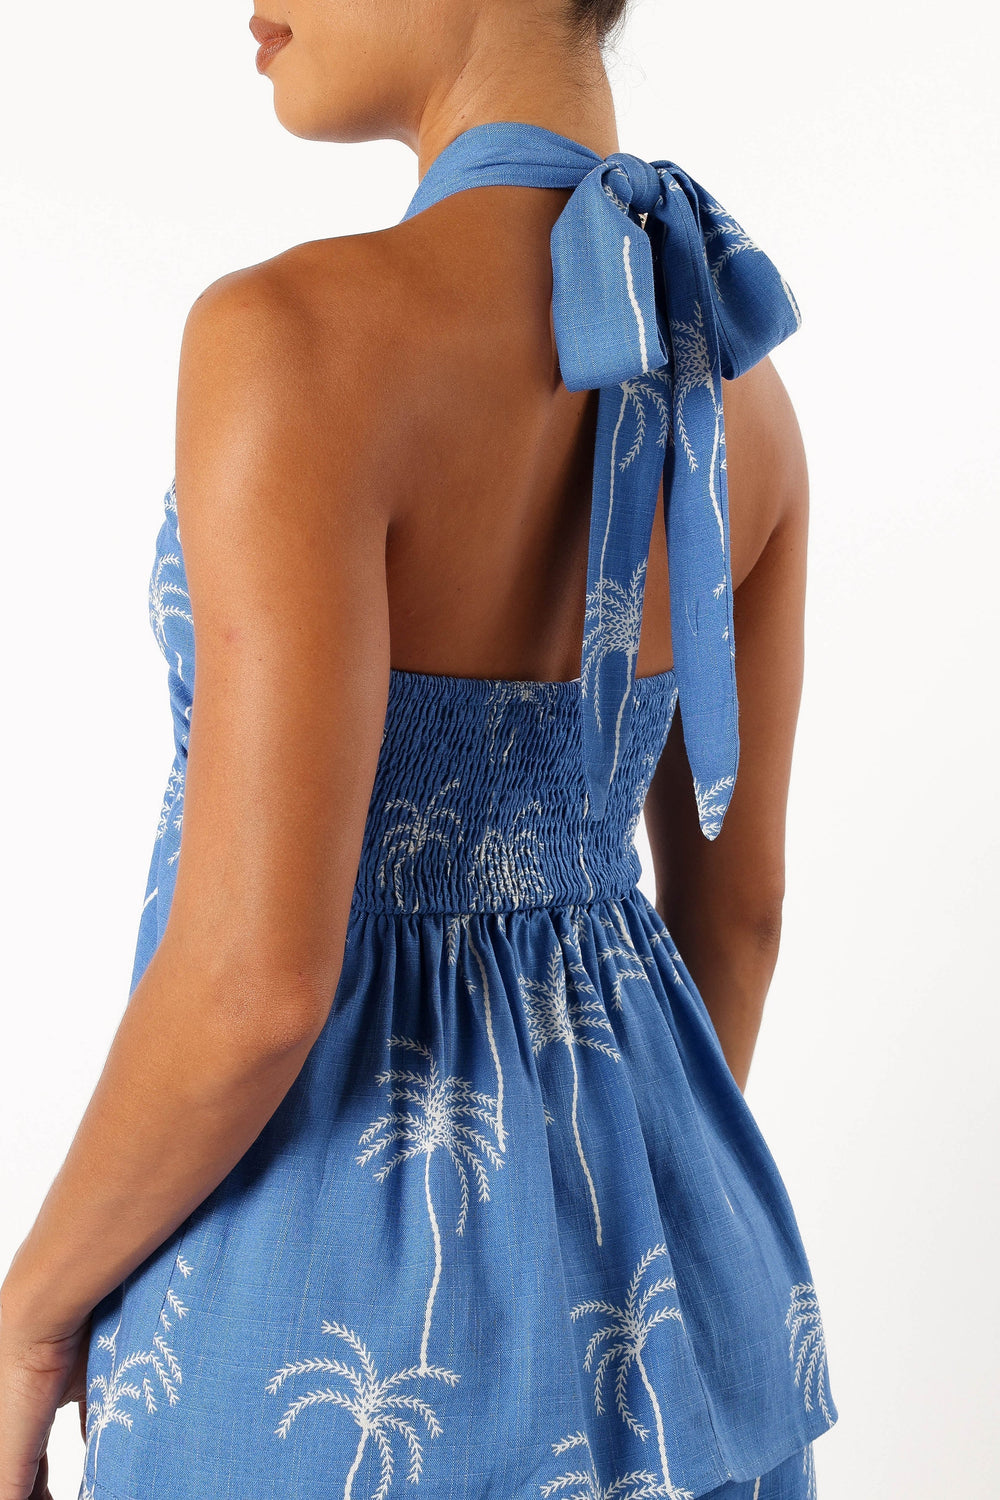 Petal and Pup USA TOPS Amira Strapless Top - Blue Palm Print